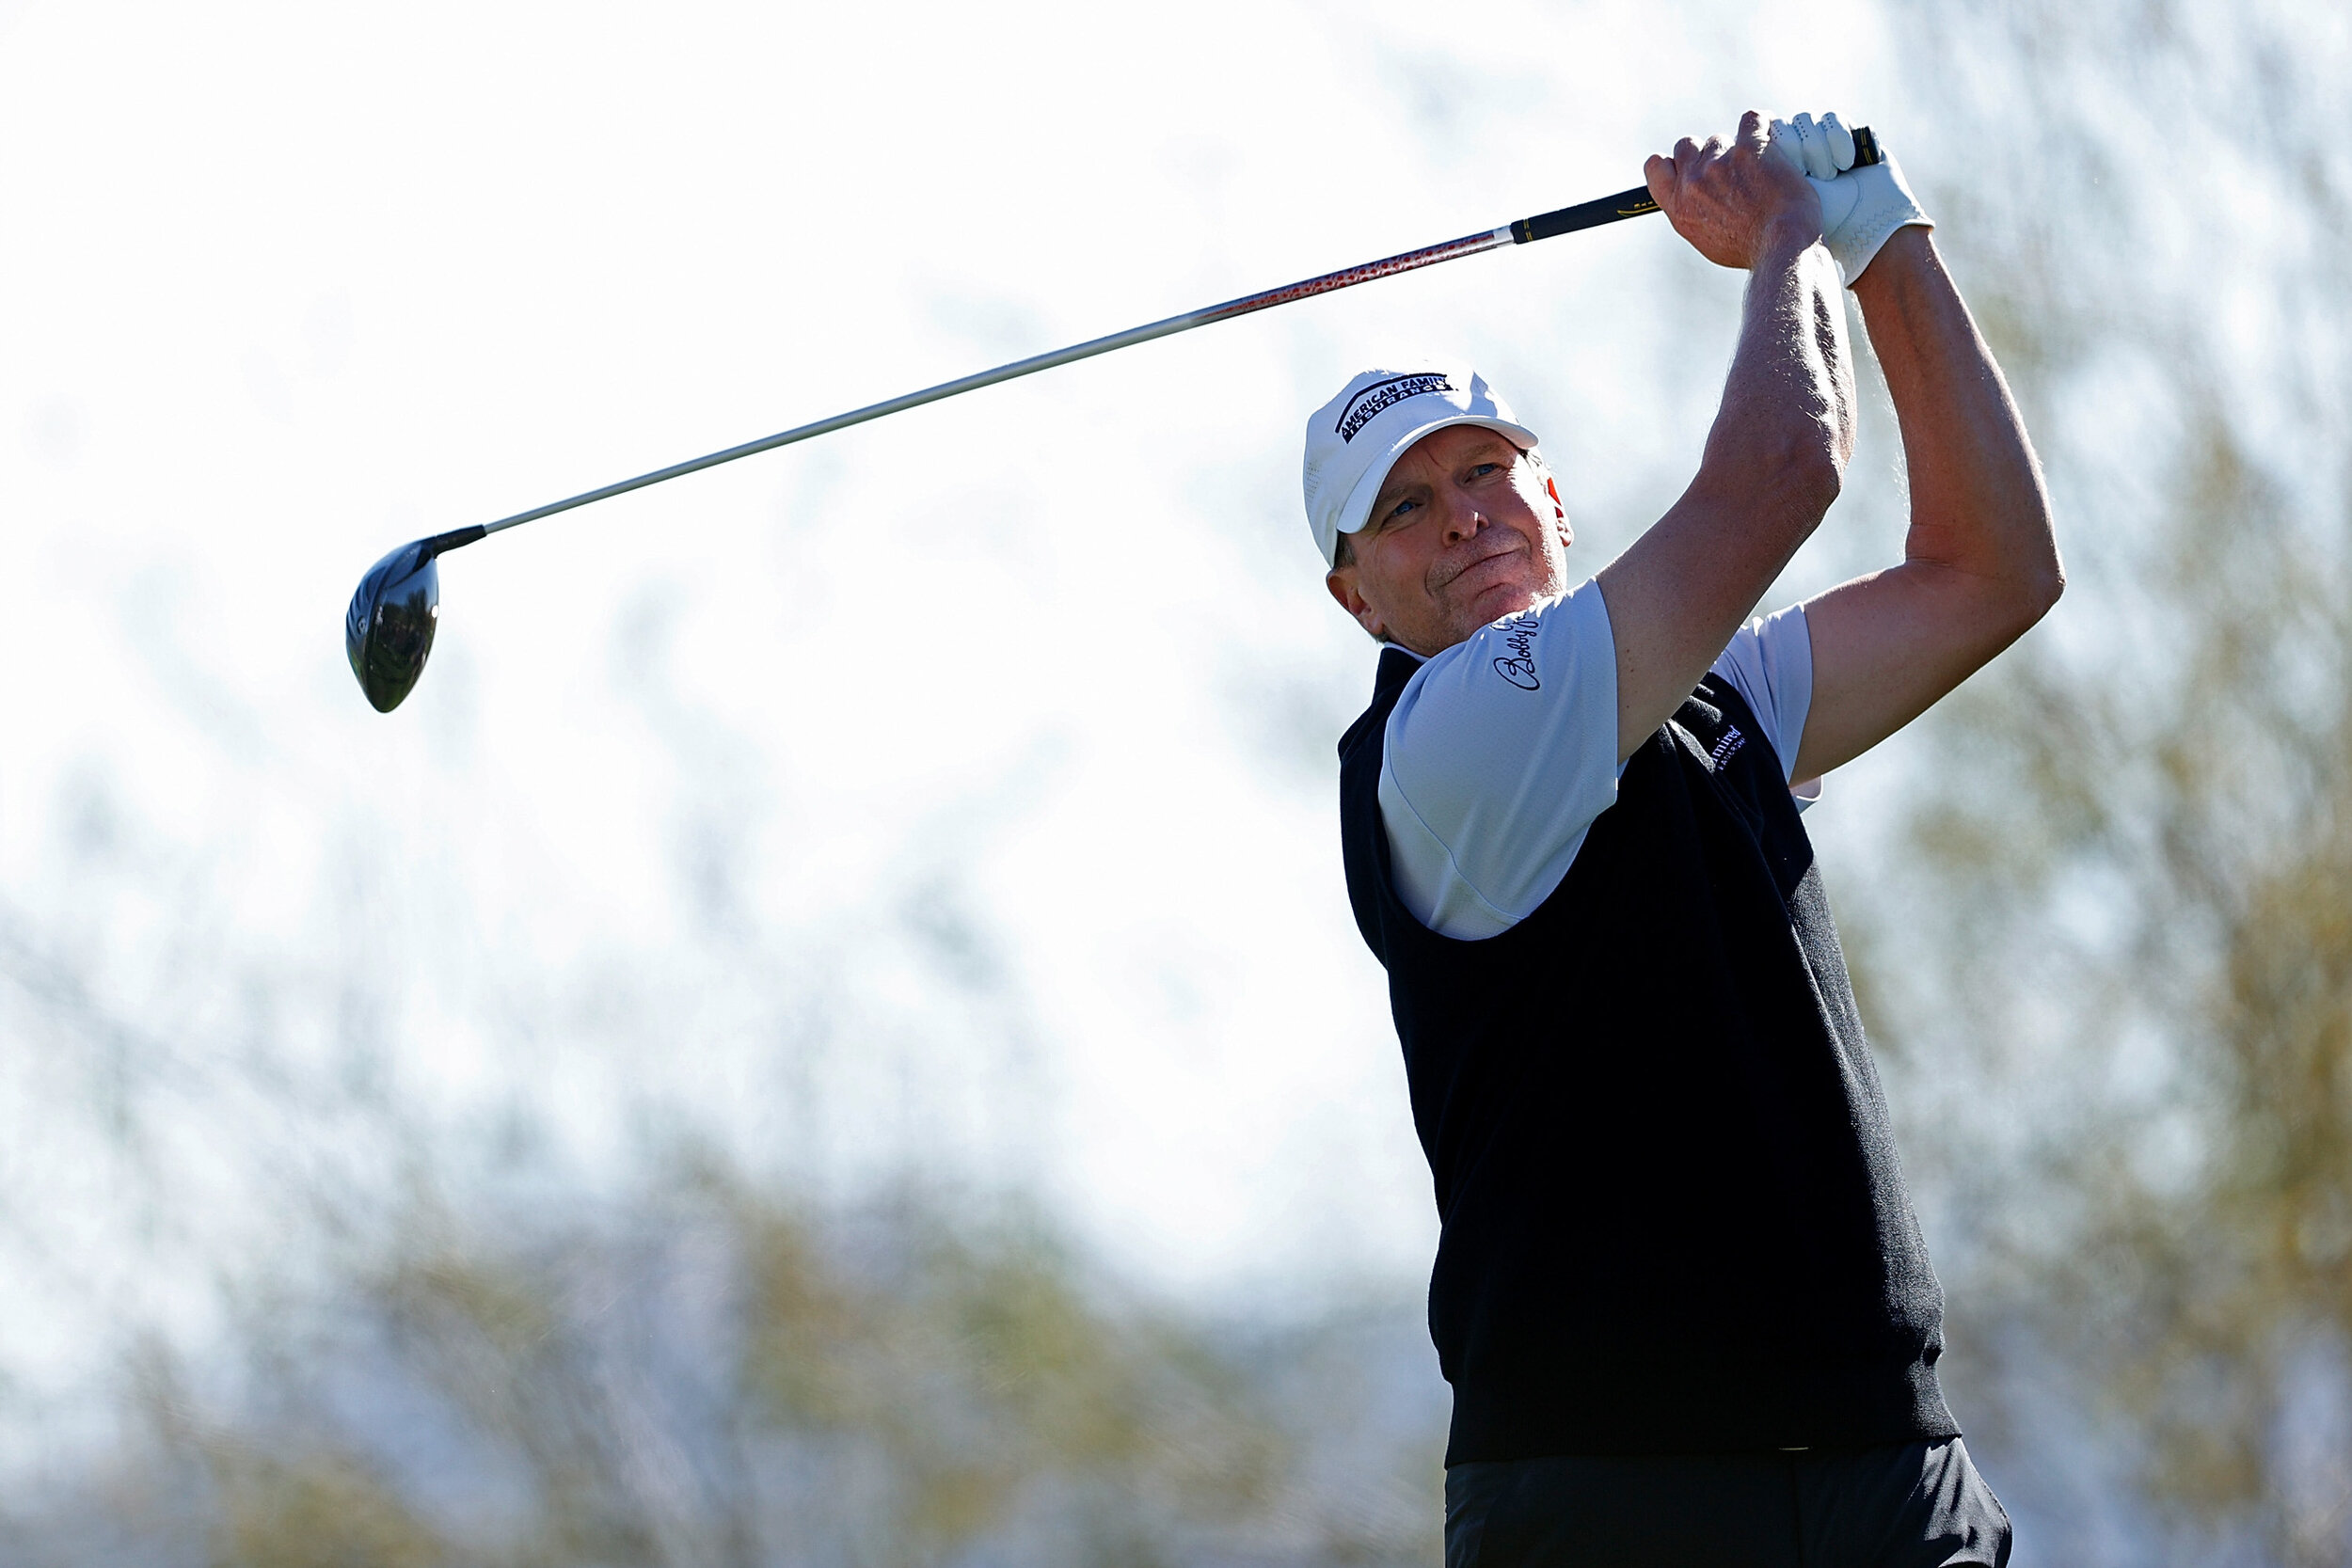  SCOTTSDALE, ARIZONA - FEBRUARY 05:  Steve Stricker of the United States hits his tee shot on the sixth hole during the second round of the Waste Management Phoenix Open at TPC Scottsdale on February 05, 2021 in Scottsdale, Arizona. (Photo by Christi